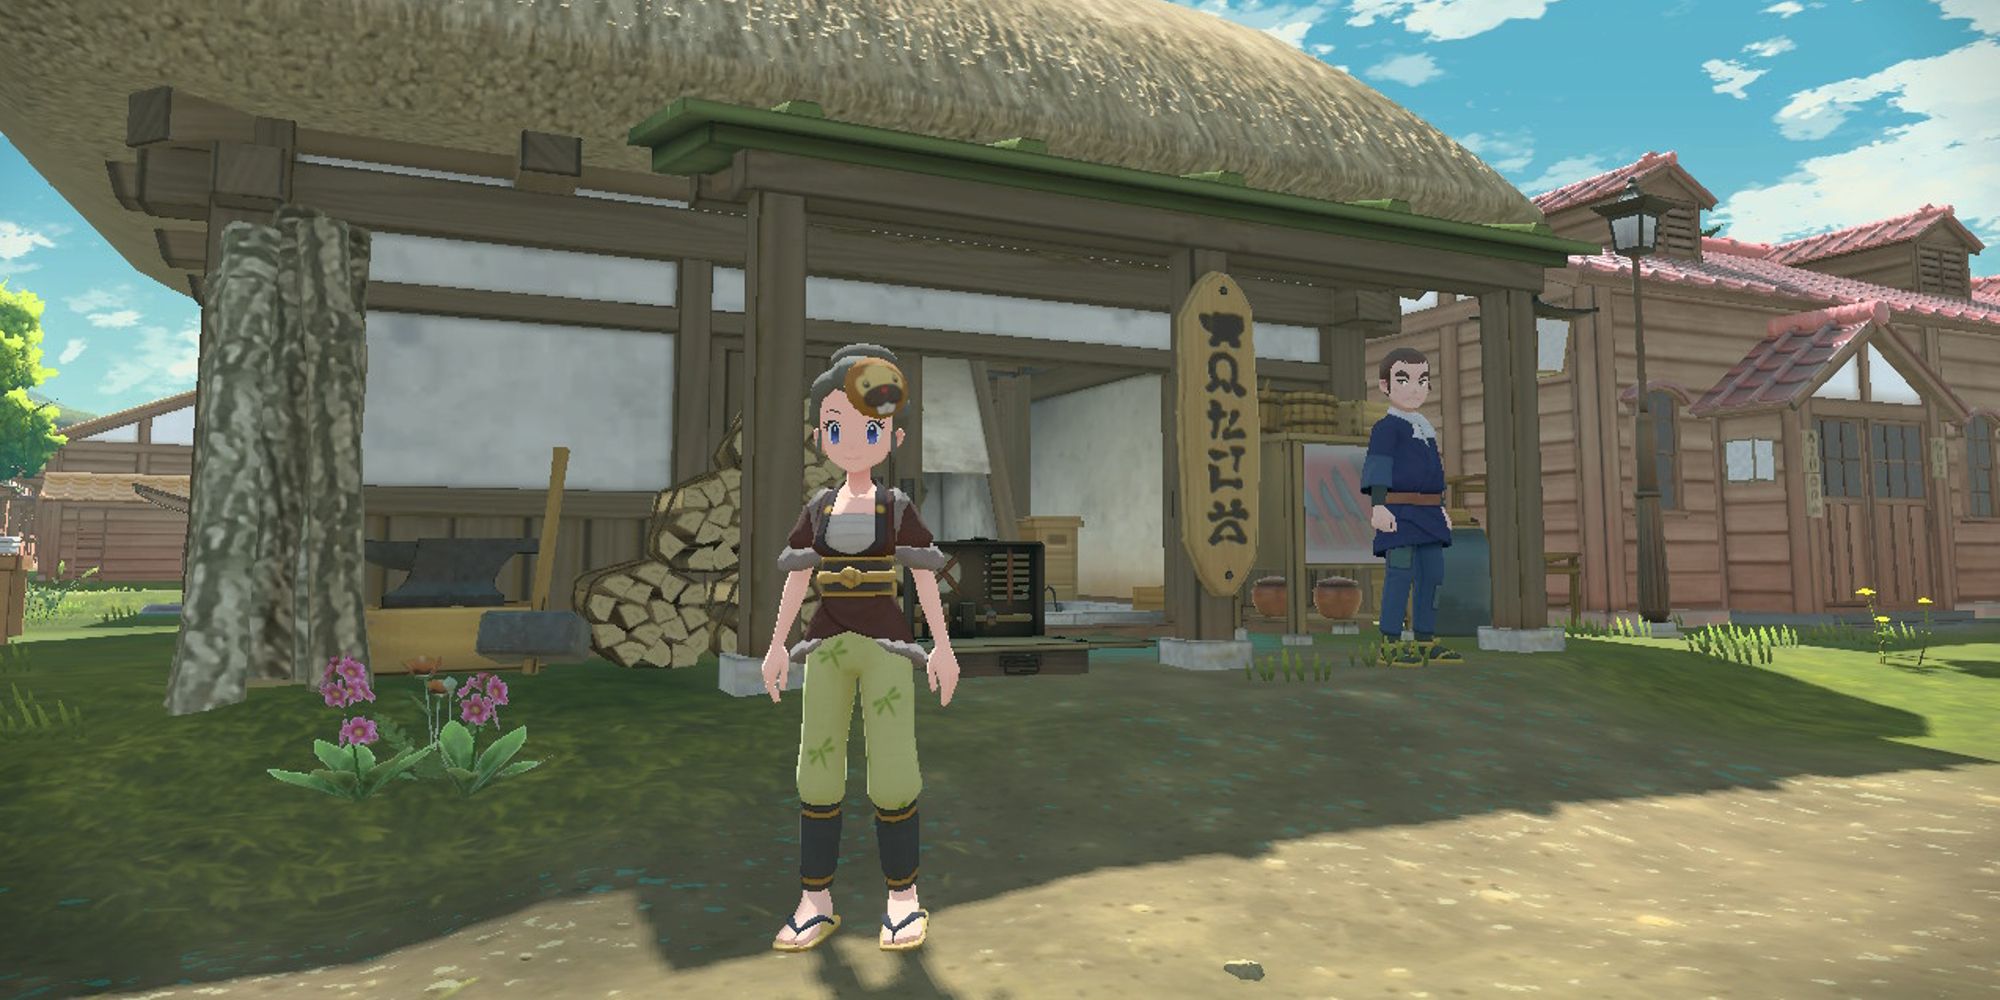 player standing outside of craftworks store in jubilife village